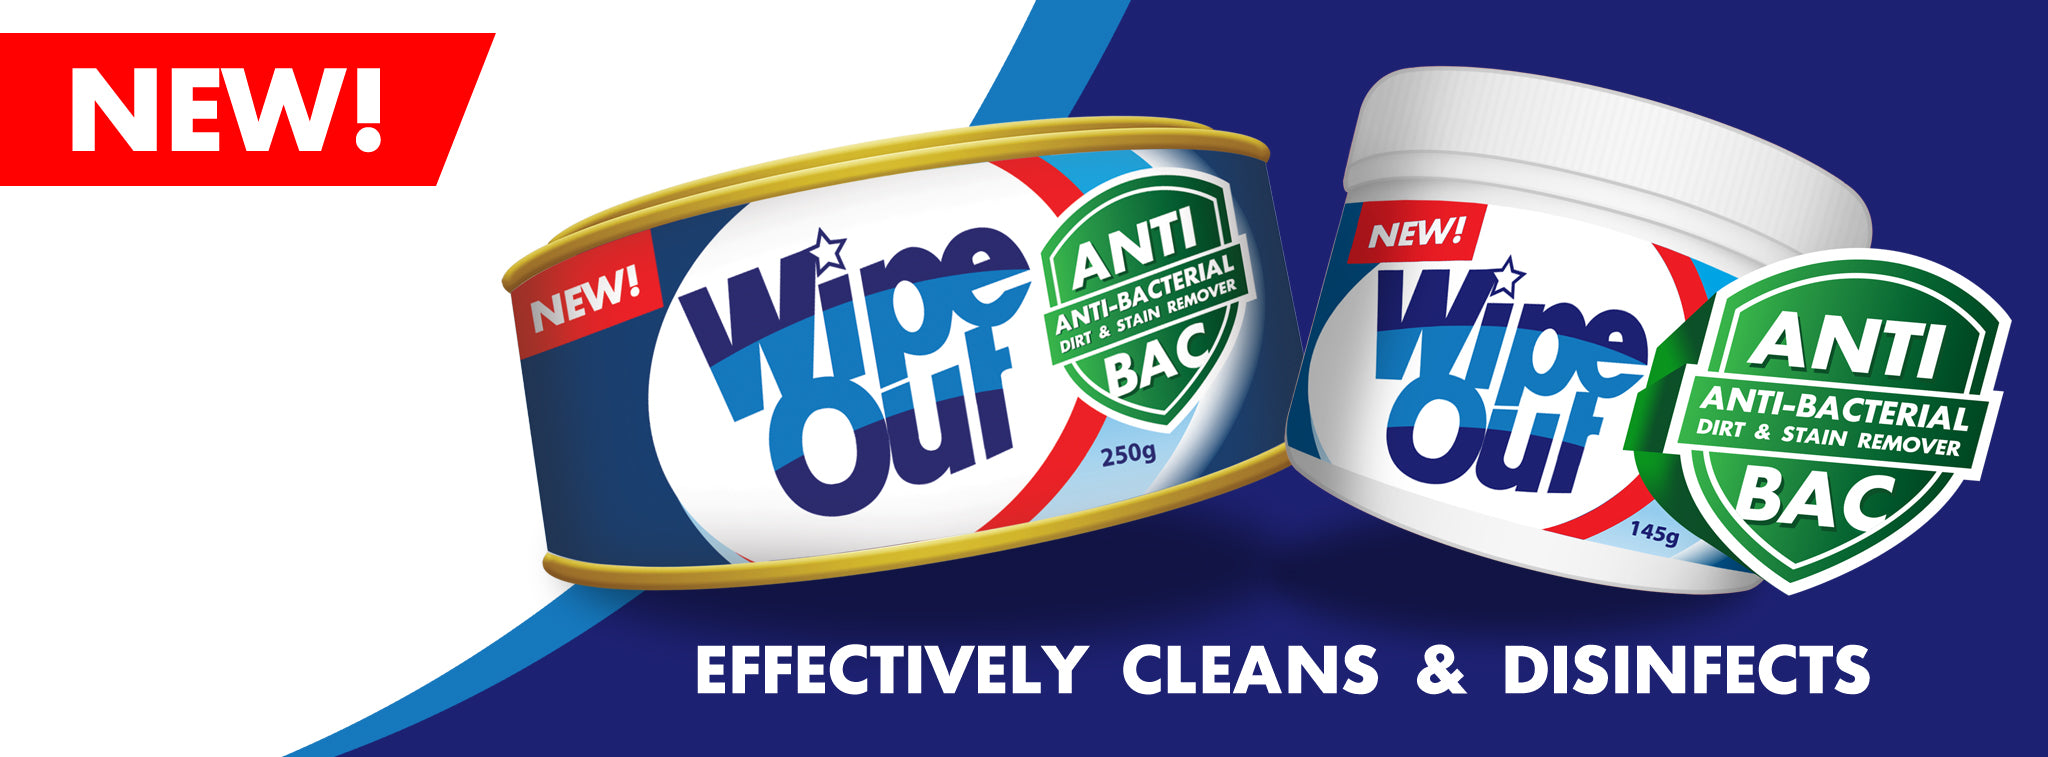 Wipe Out Dirt And Stain Remover (145g) Multipurpose Cleaner